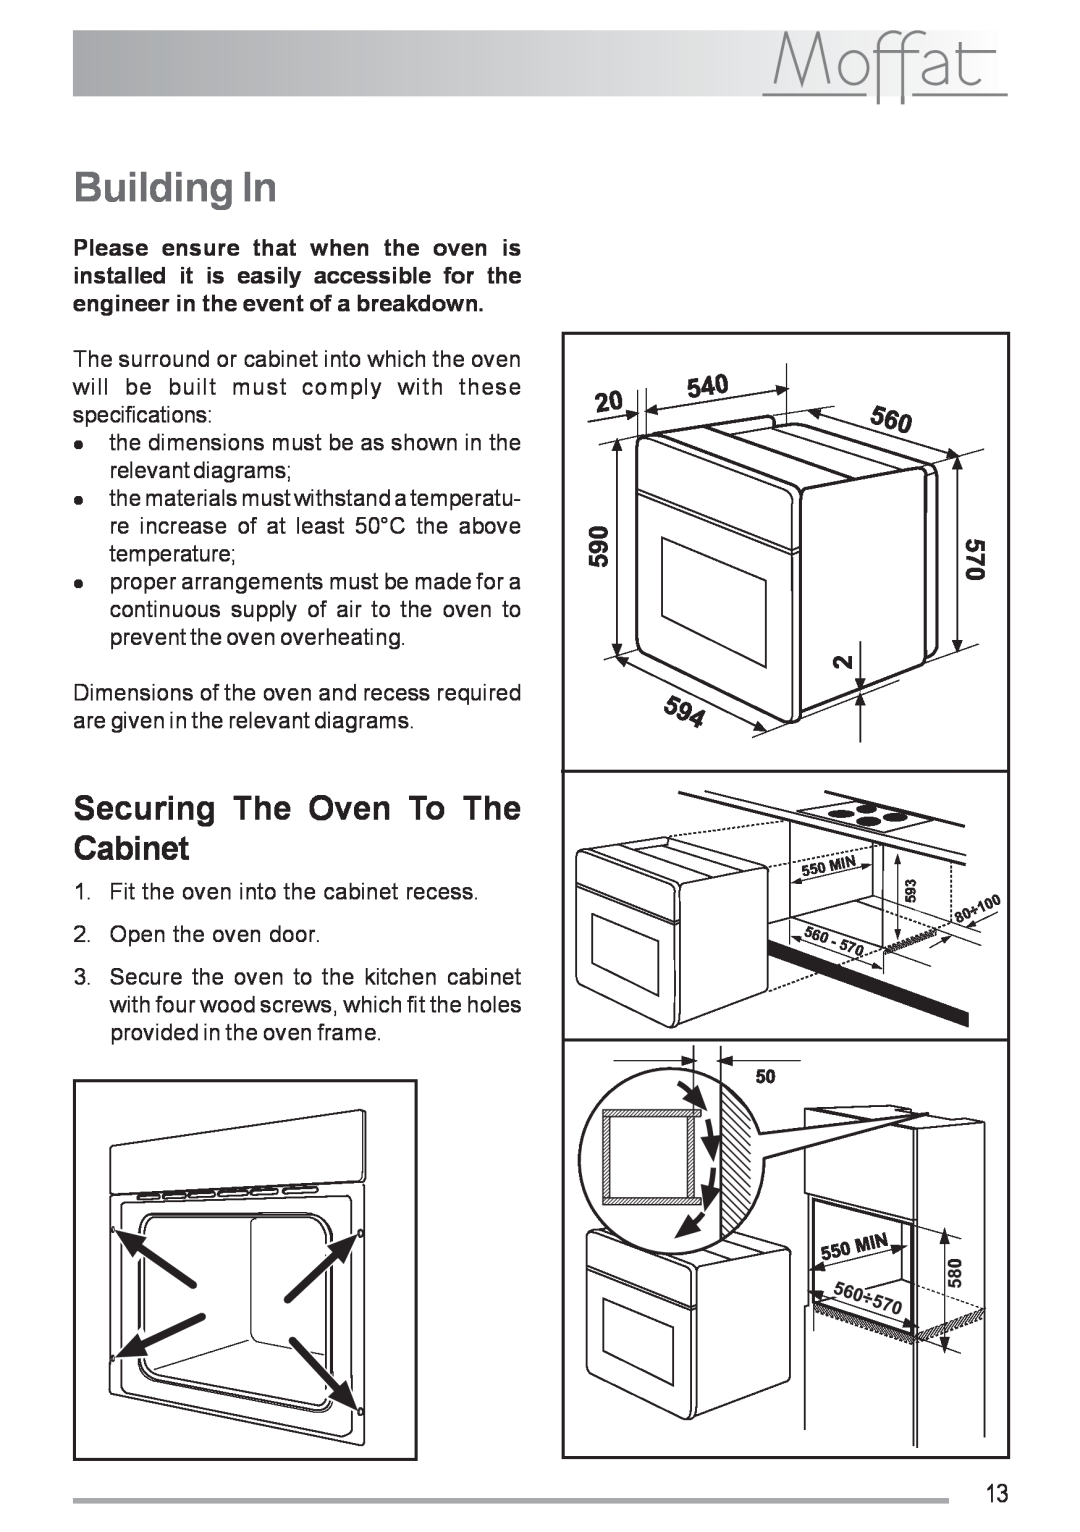 Moffat MSS 601 manual Building In, Securing The Oven To The Cabinet 